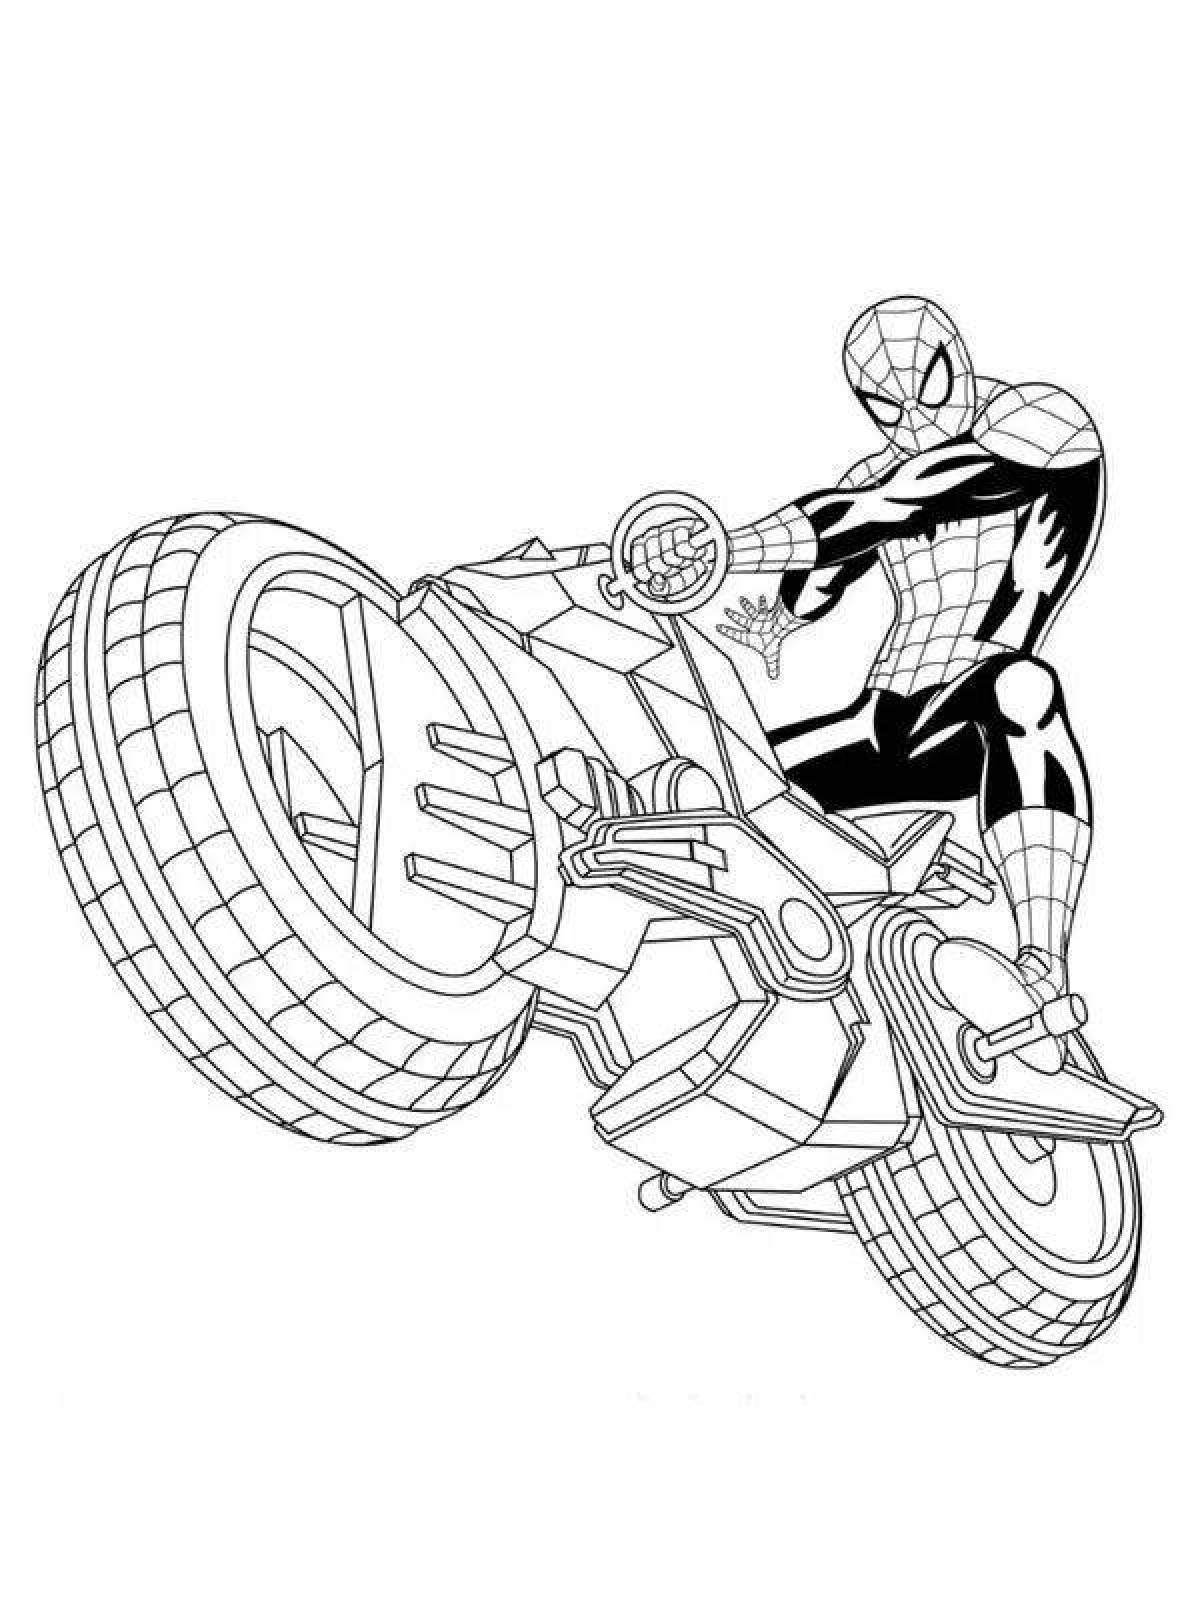 Colorful spiderman car coloring page